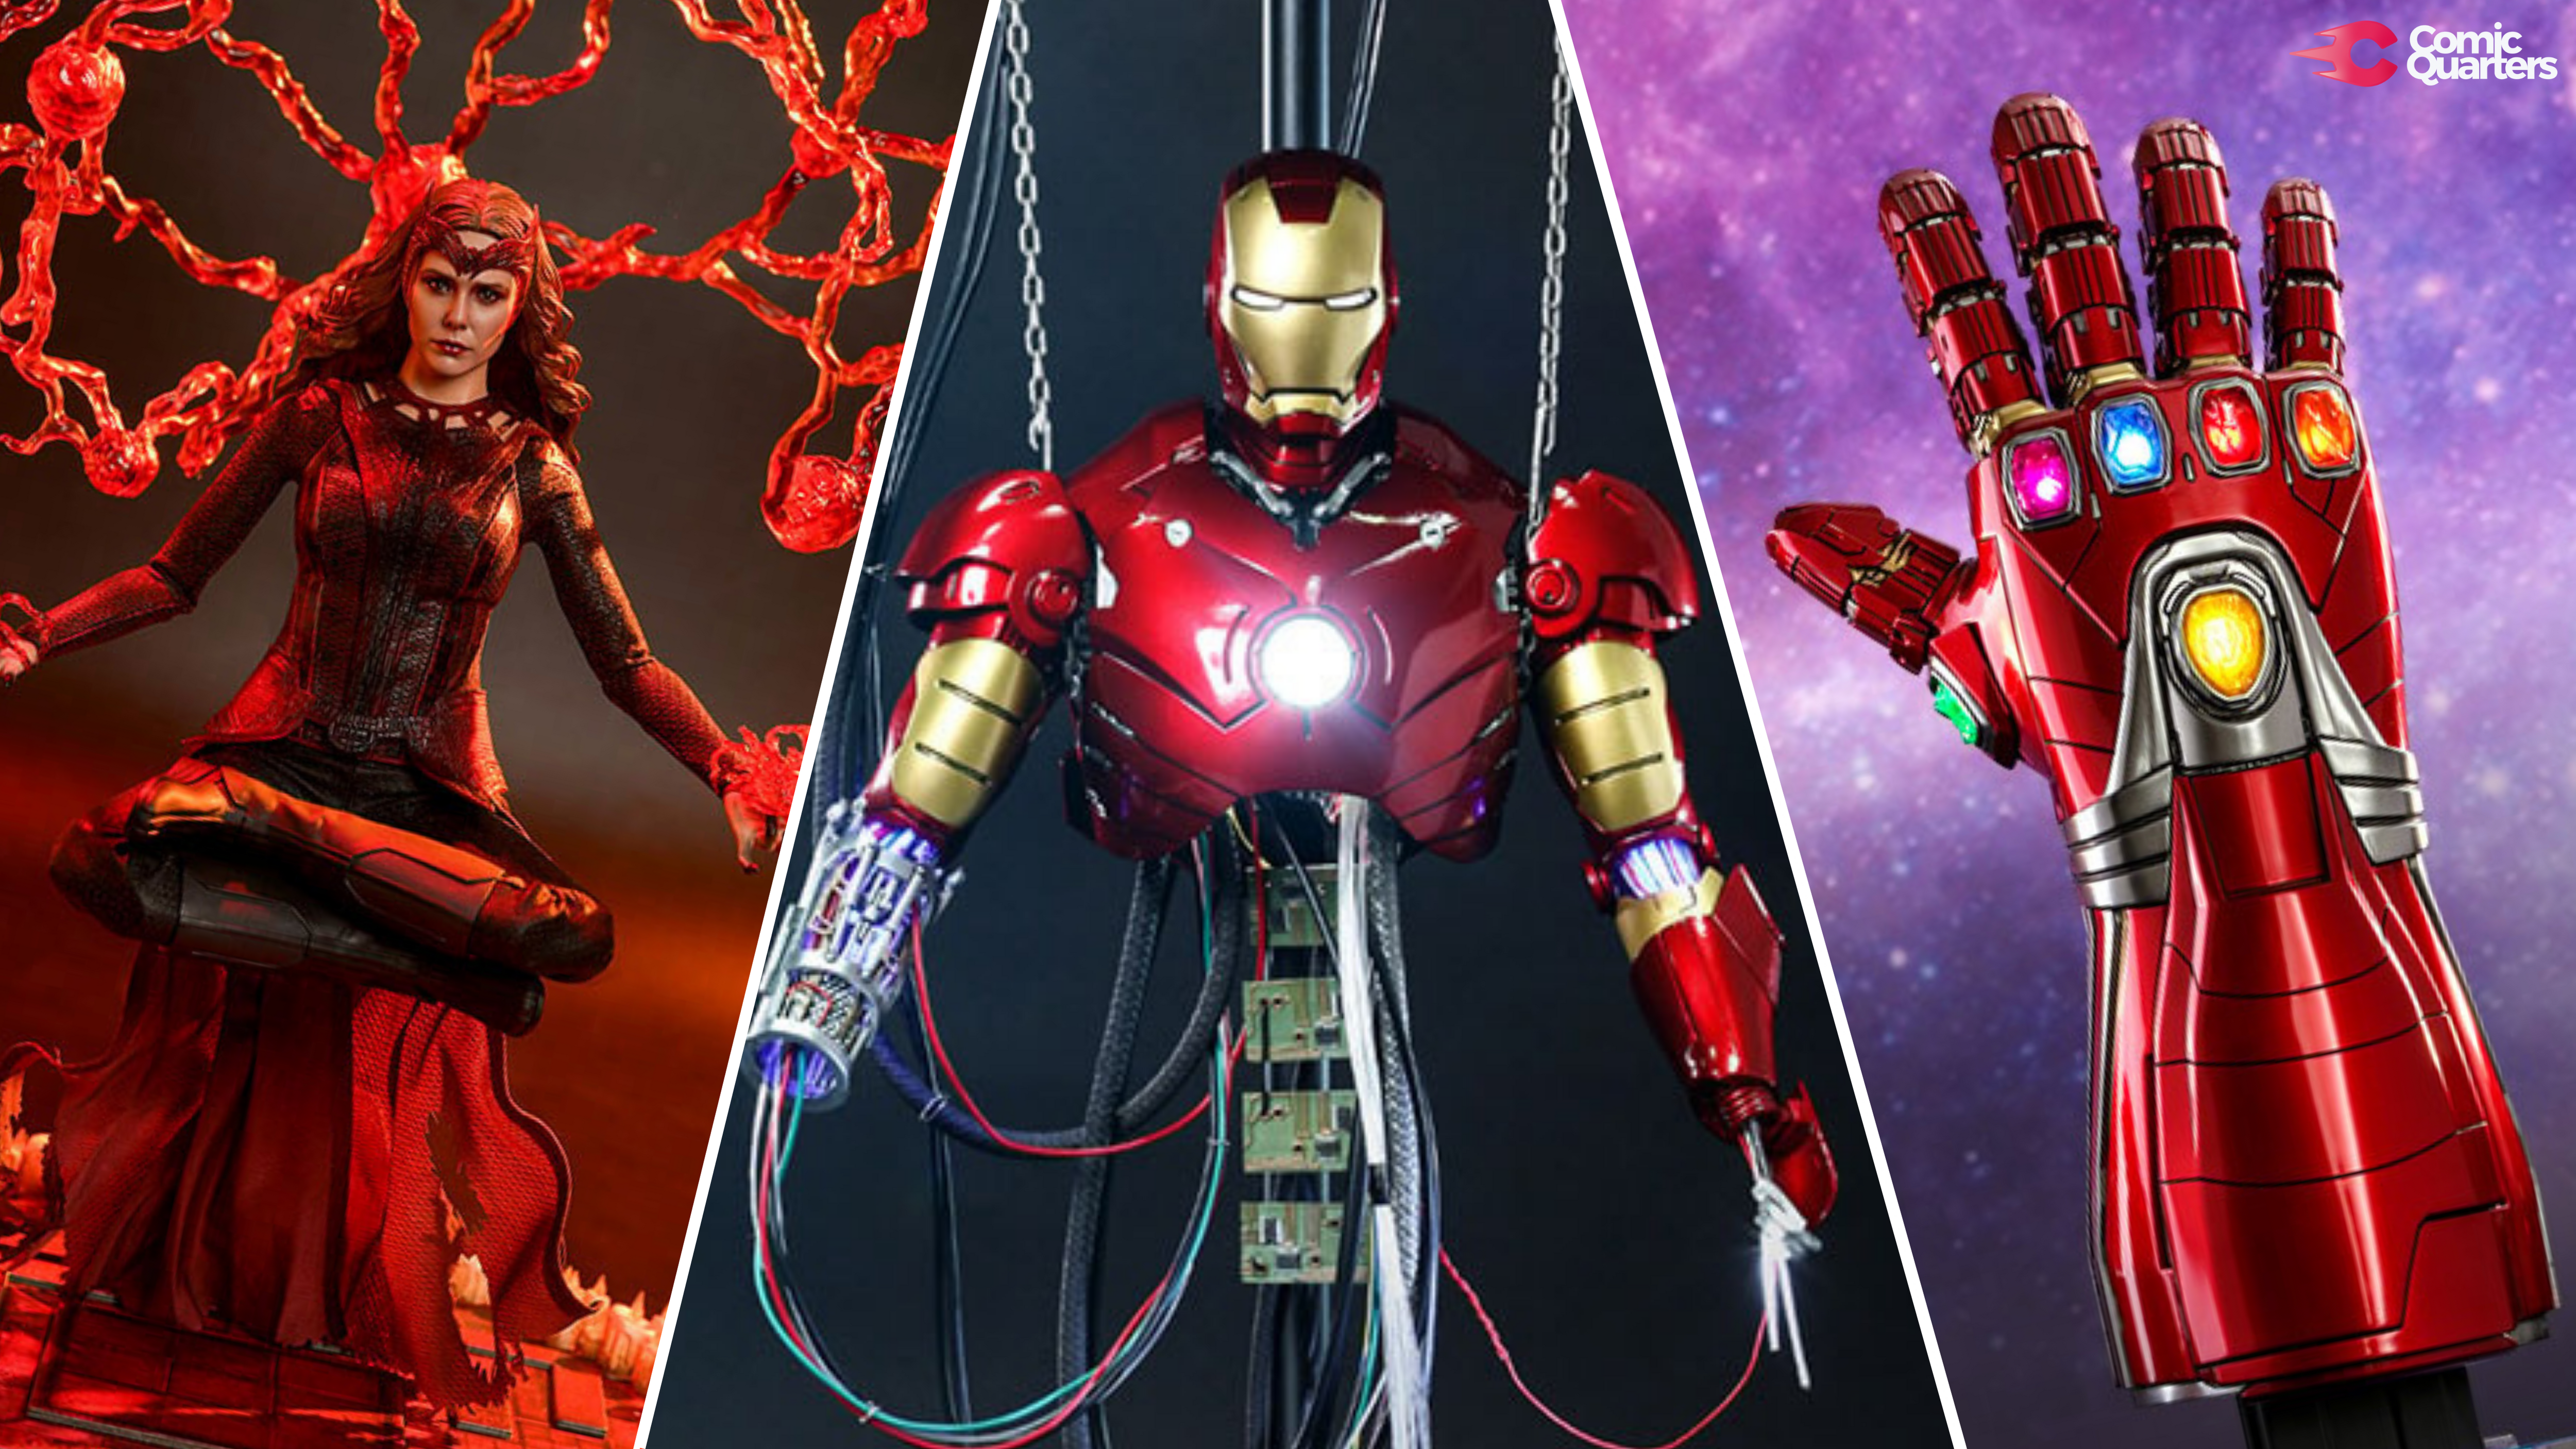 An Image of 3 different Marvel Collectibles by Sideshow.